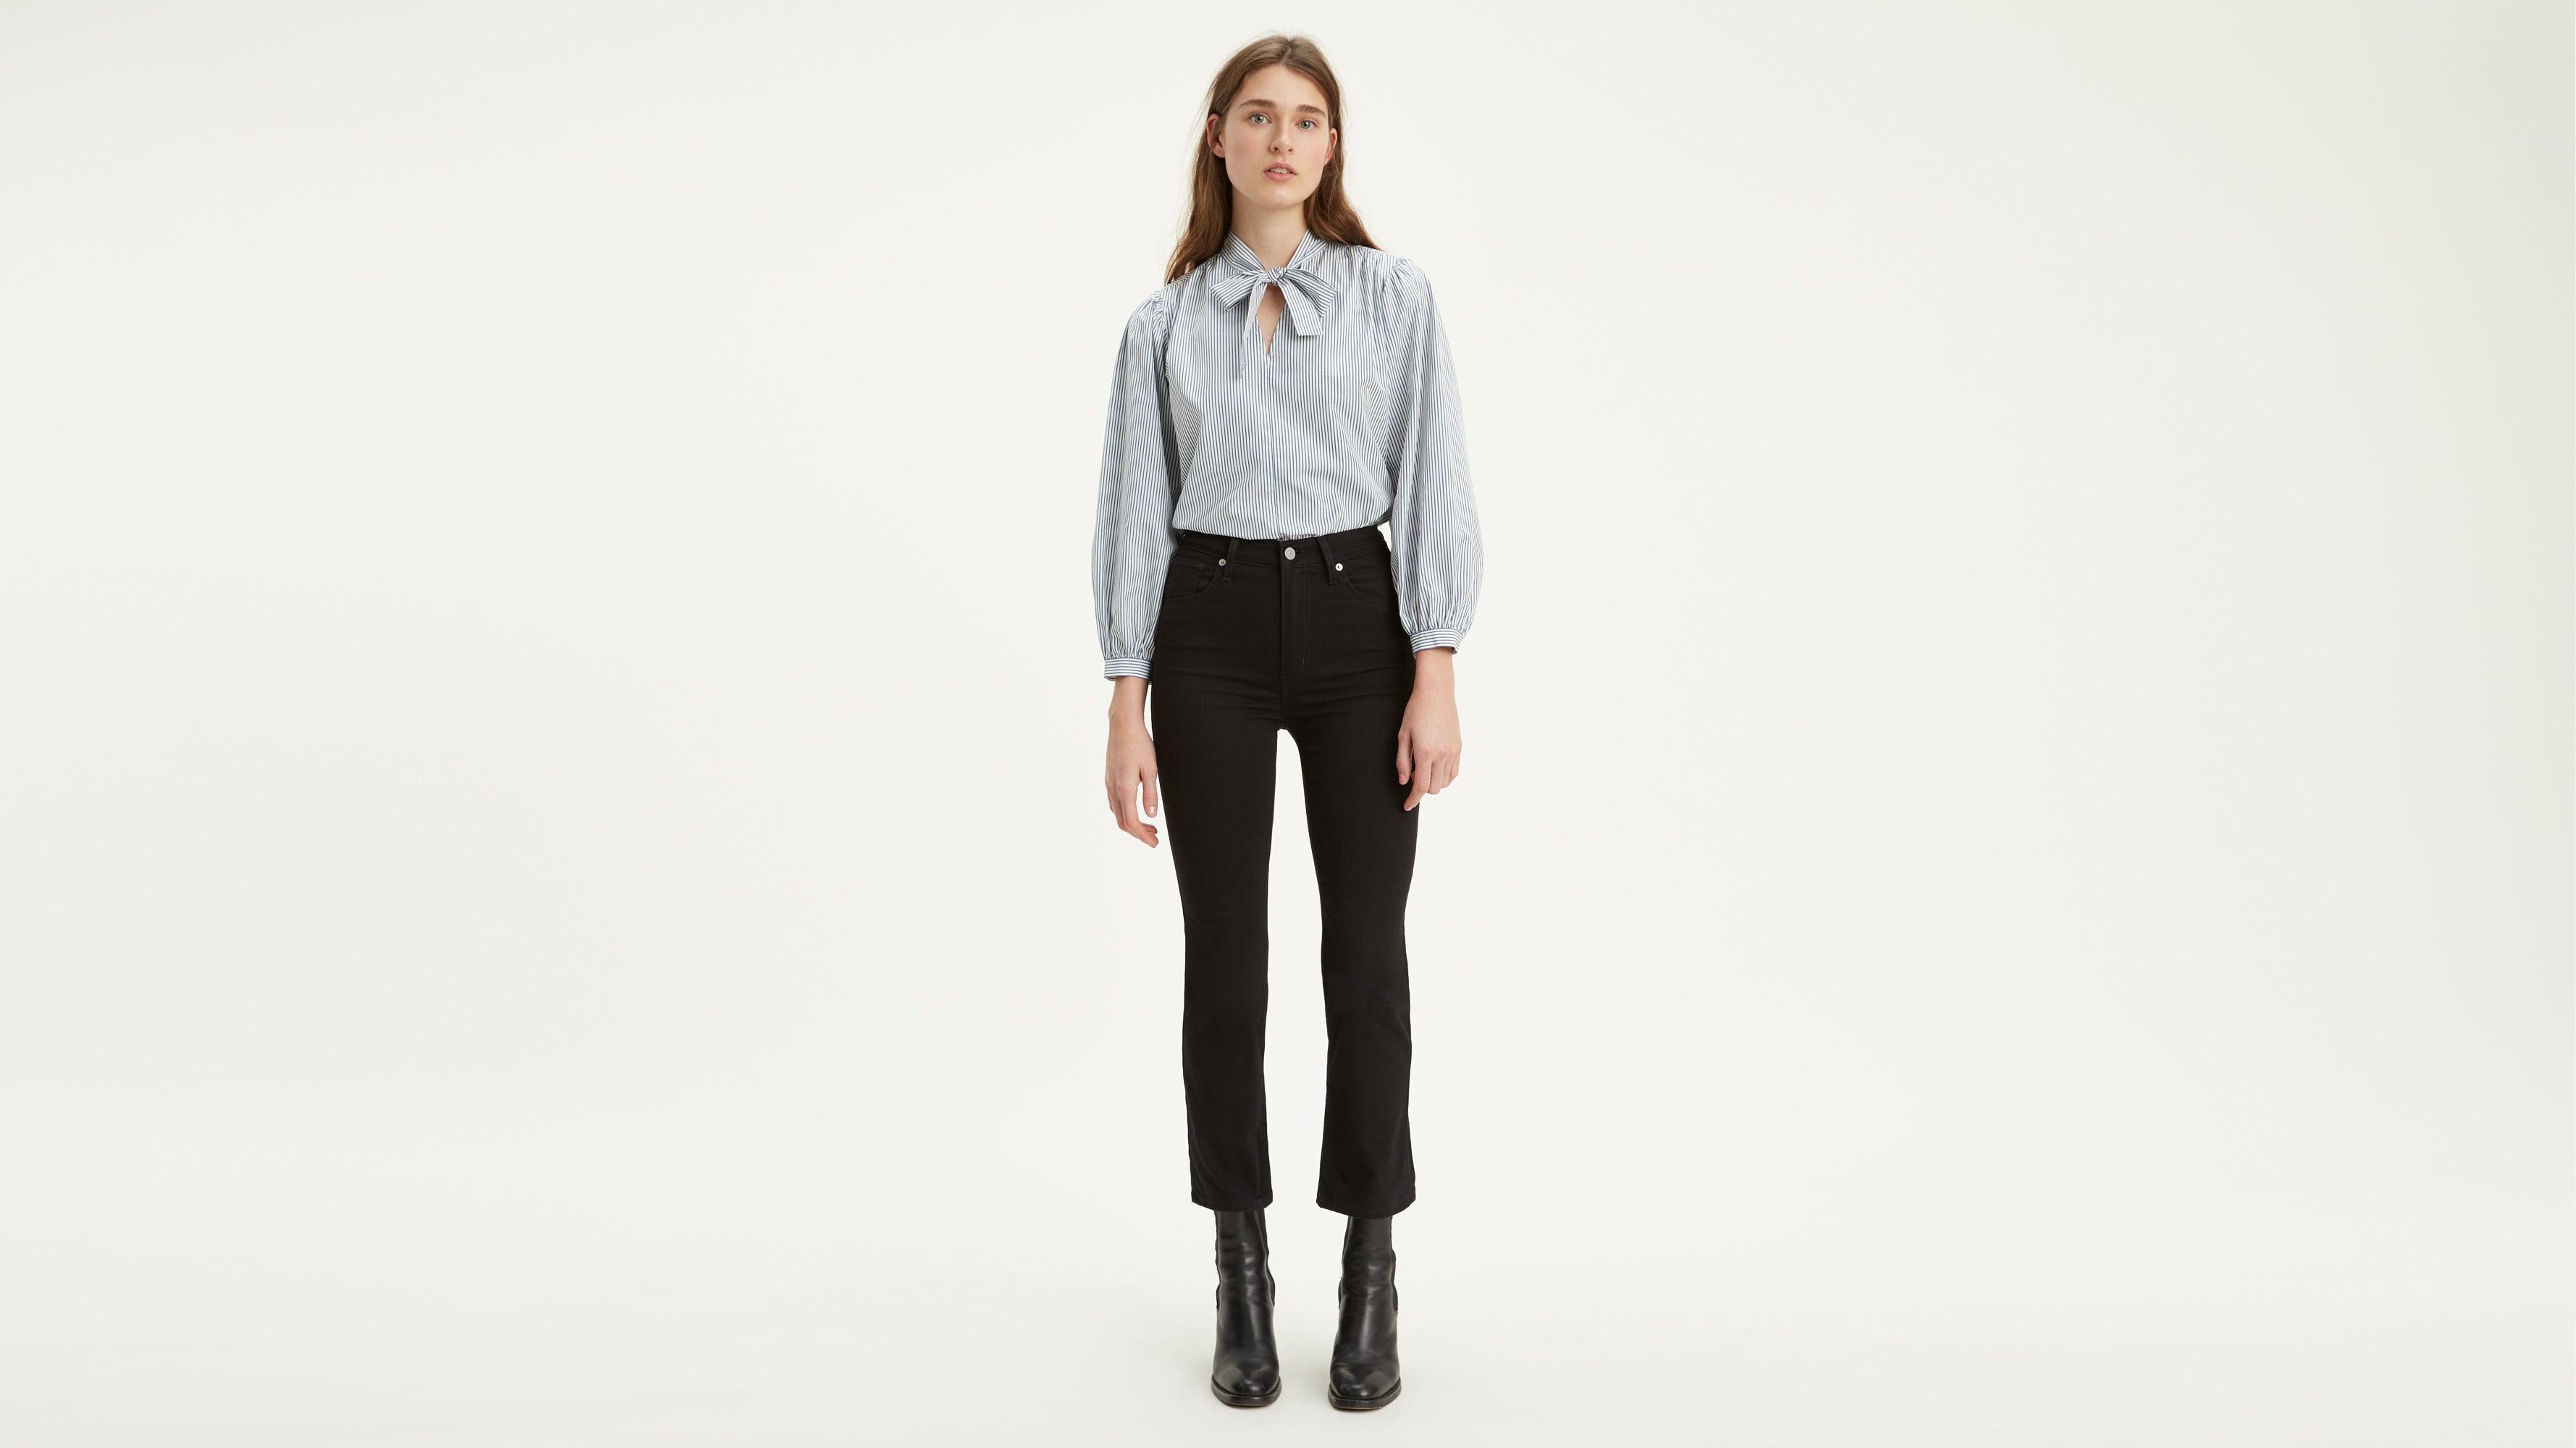 levi's mile high crop flare jeans